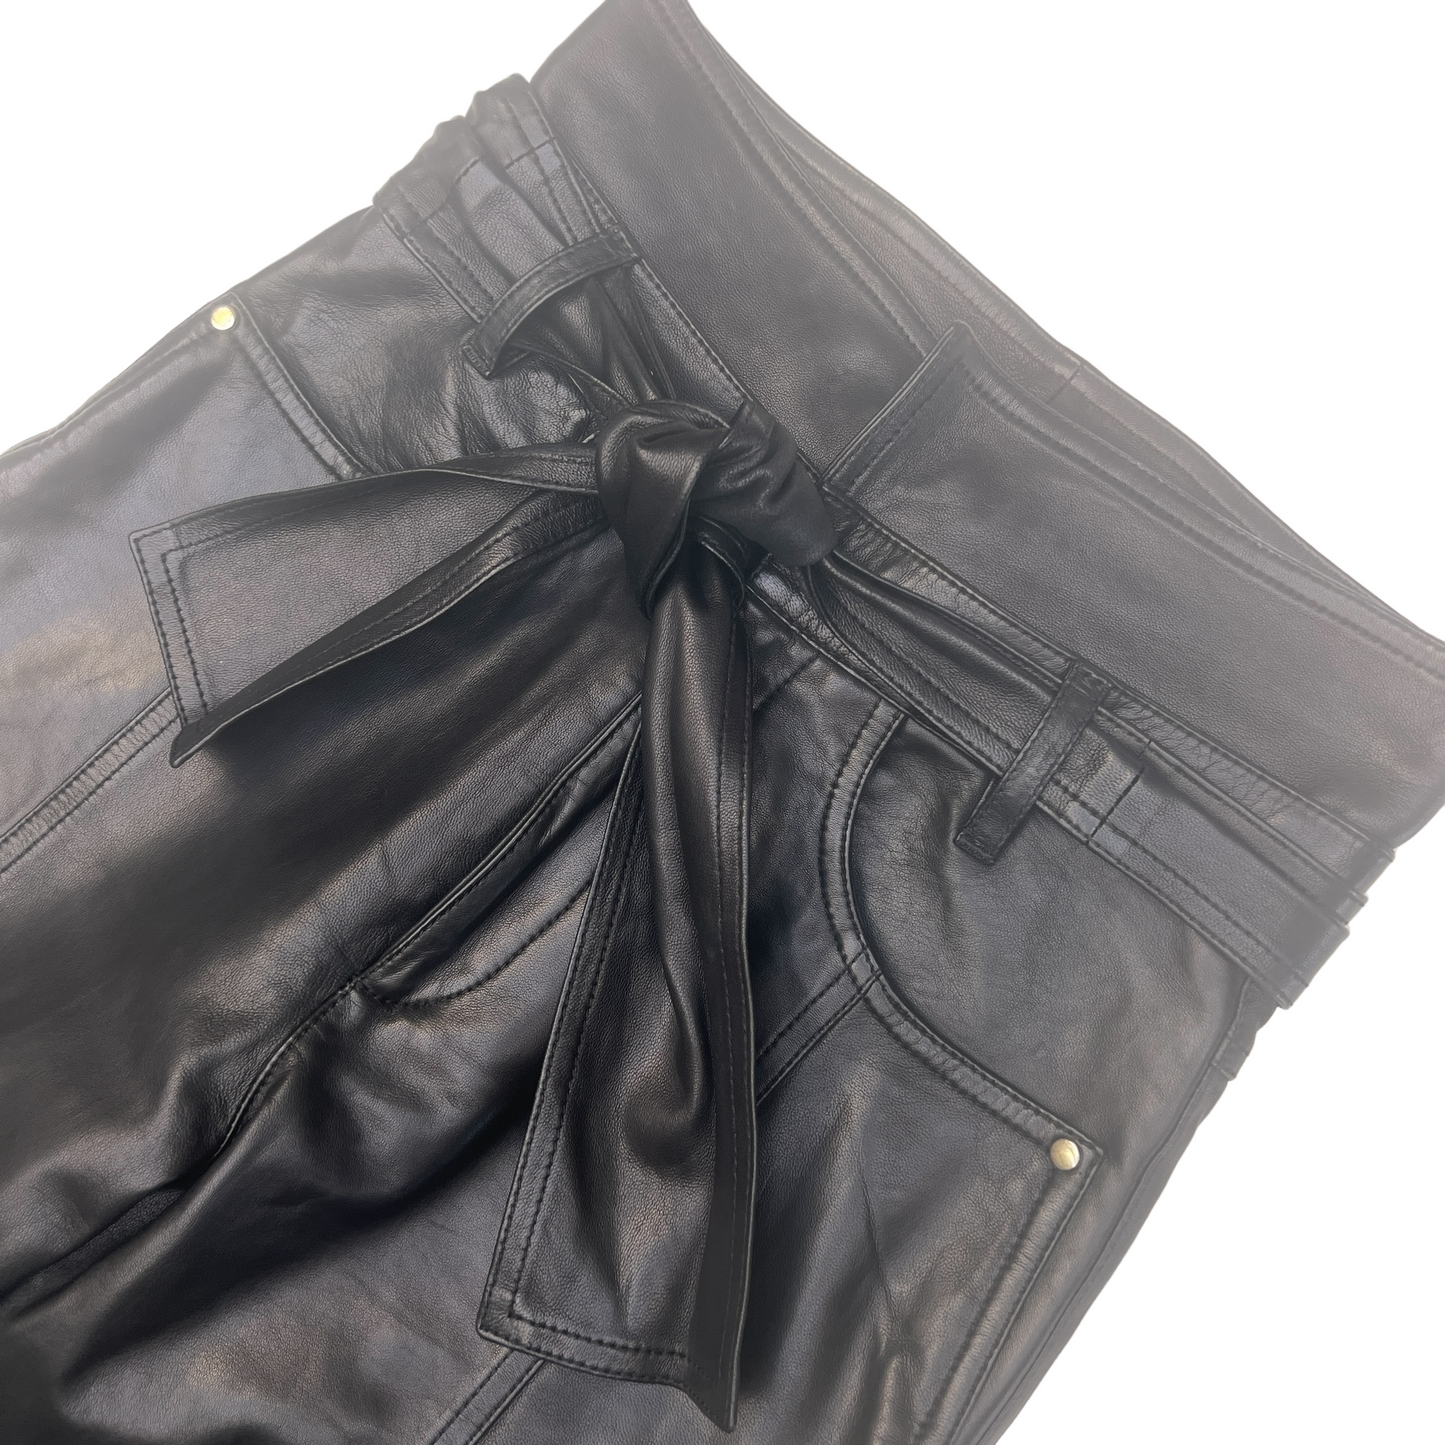 2020 Black High Waisted Leather Pants - XS